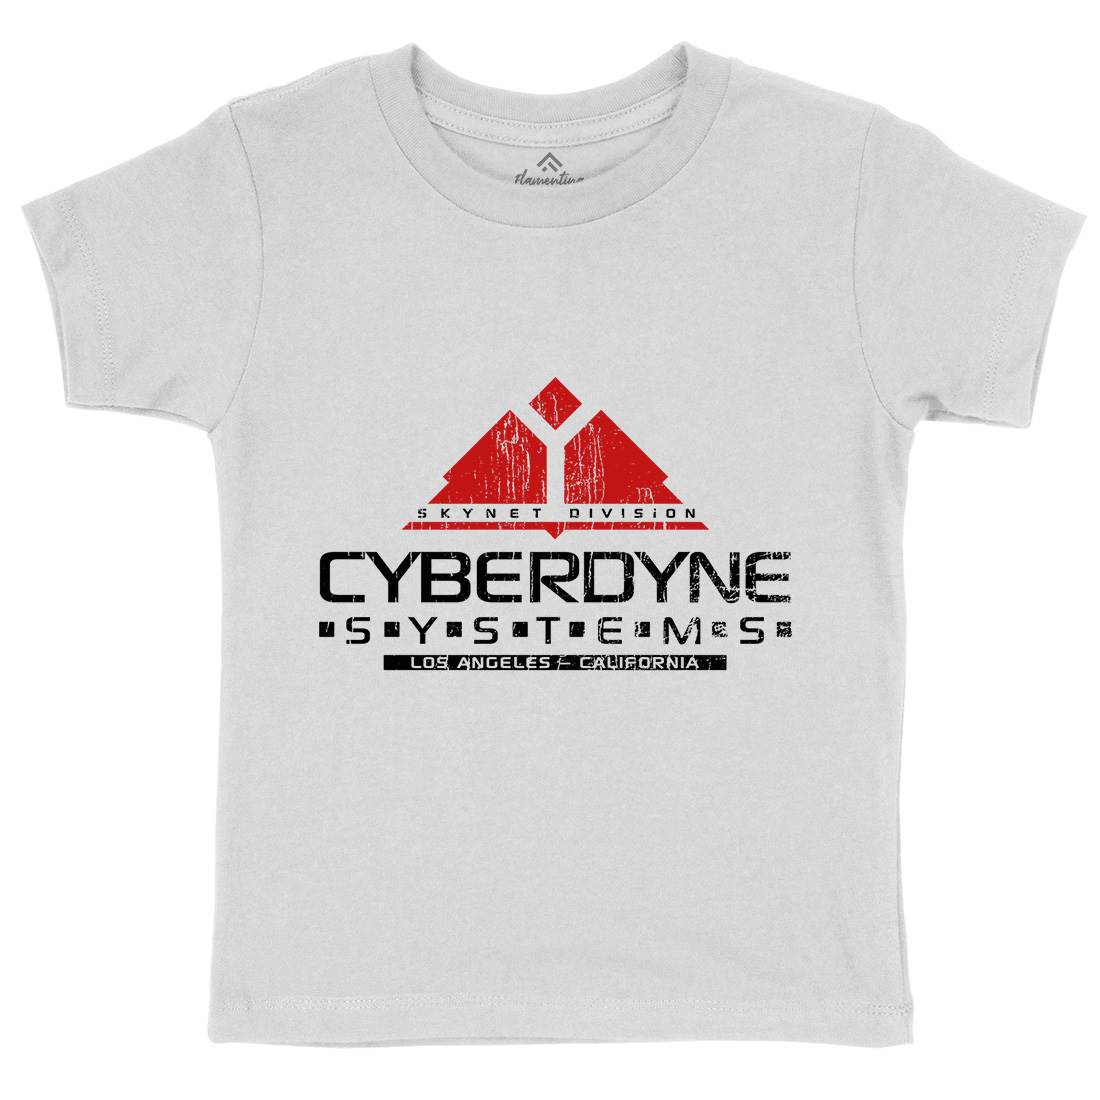 Cyberdyne Systems Kids Crew Neck T-Shirt Space D122